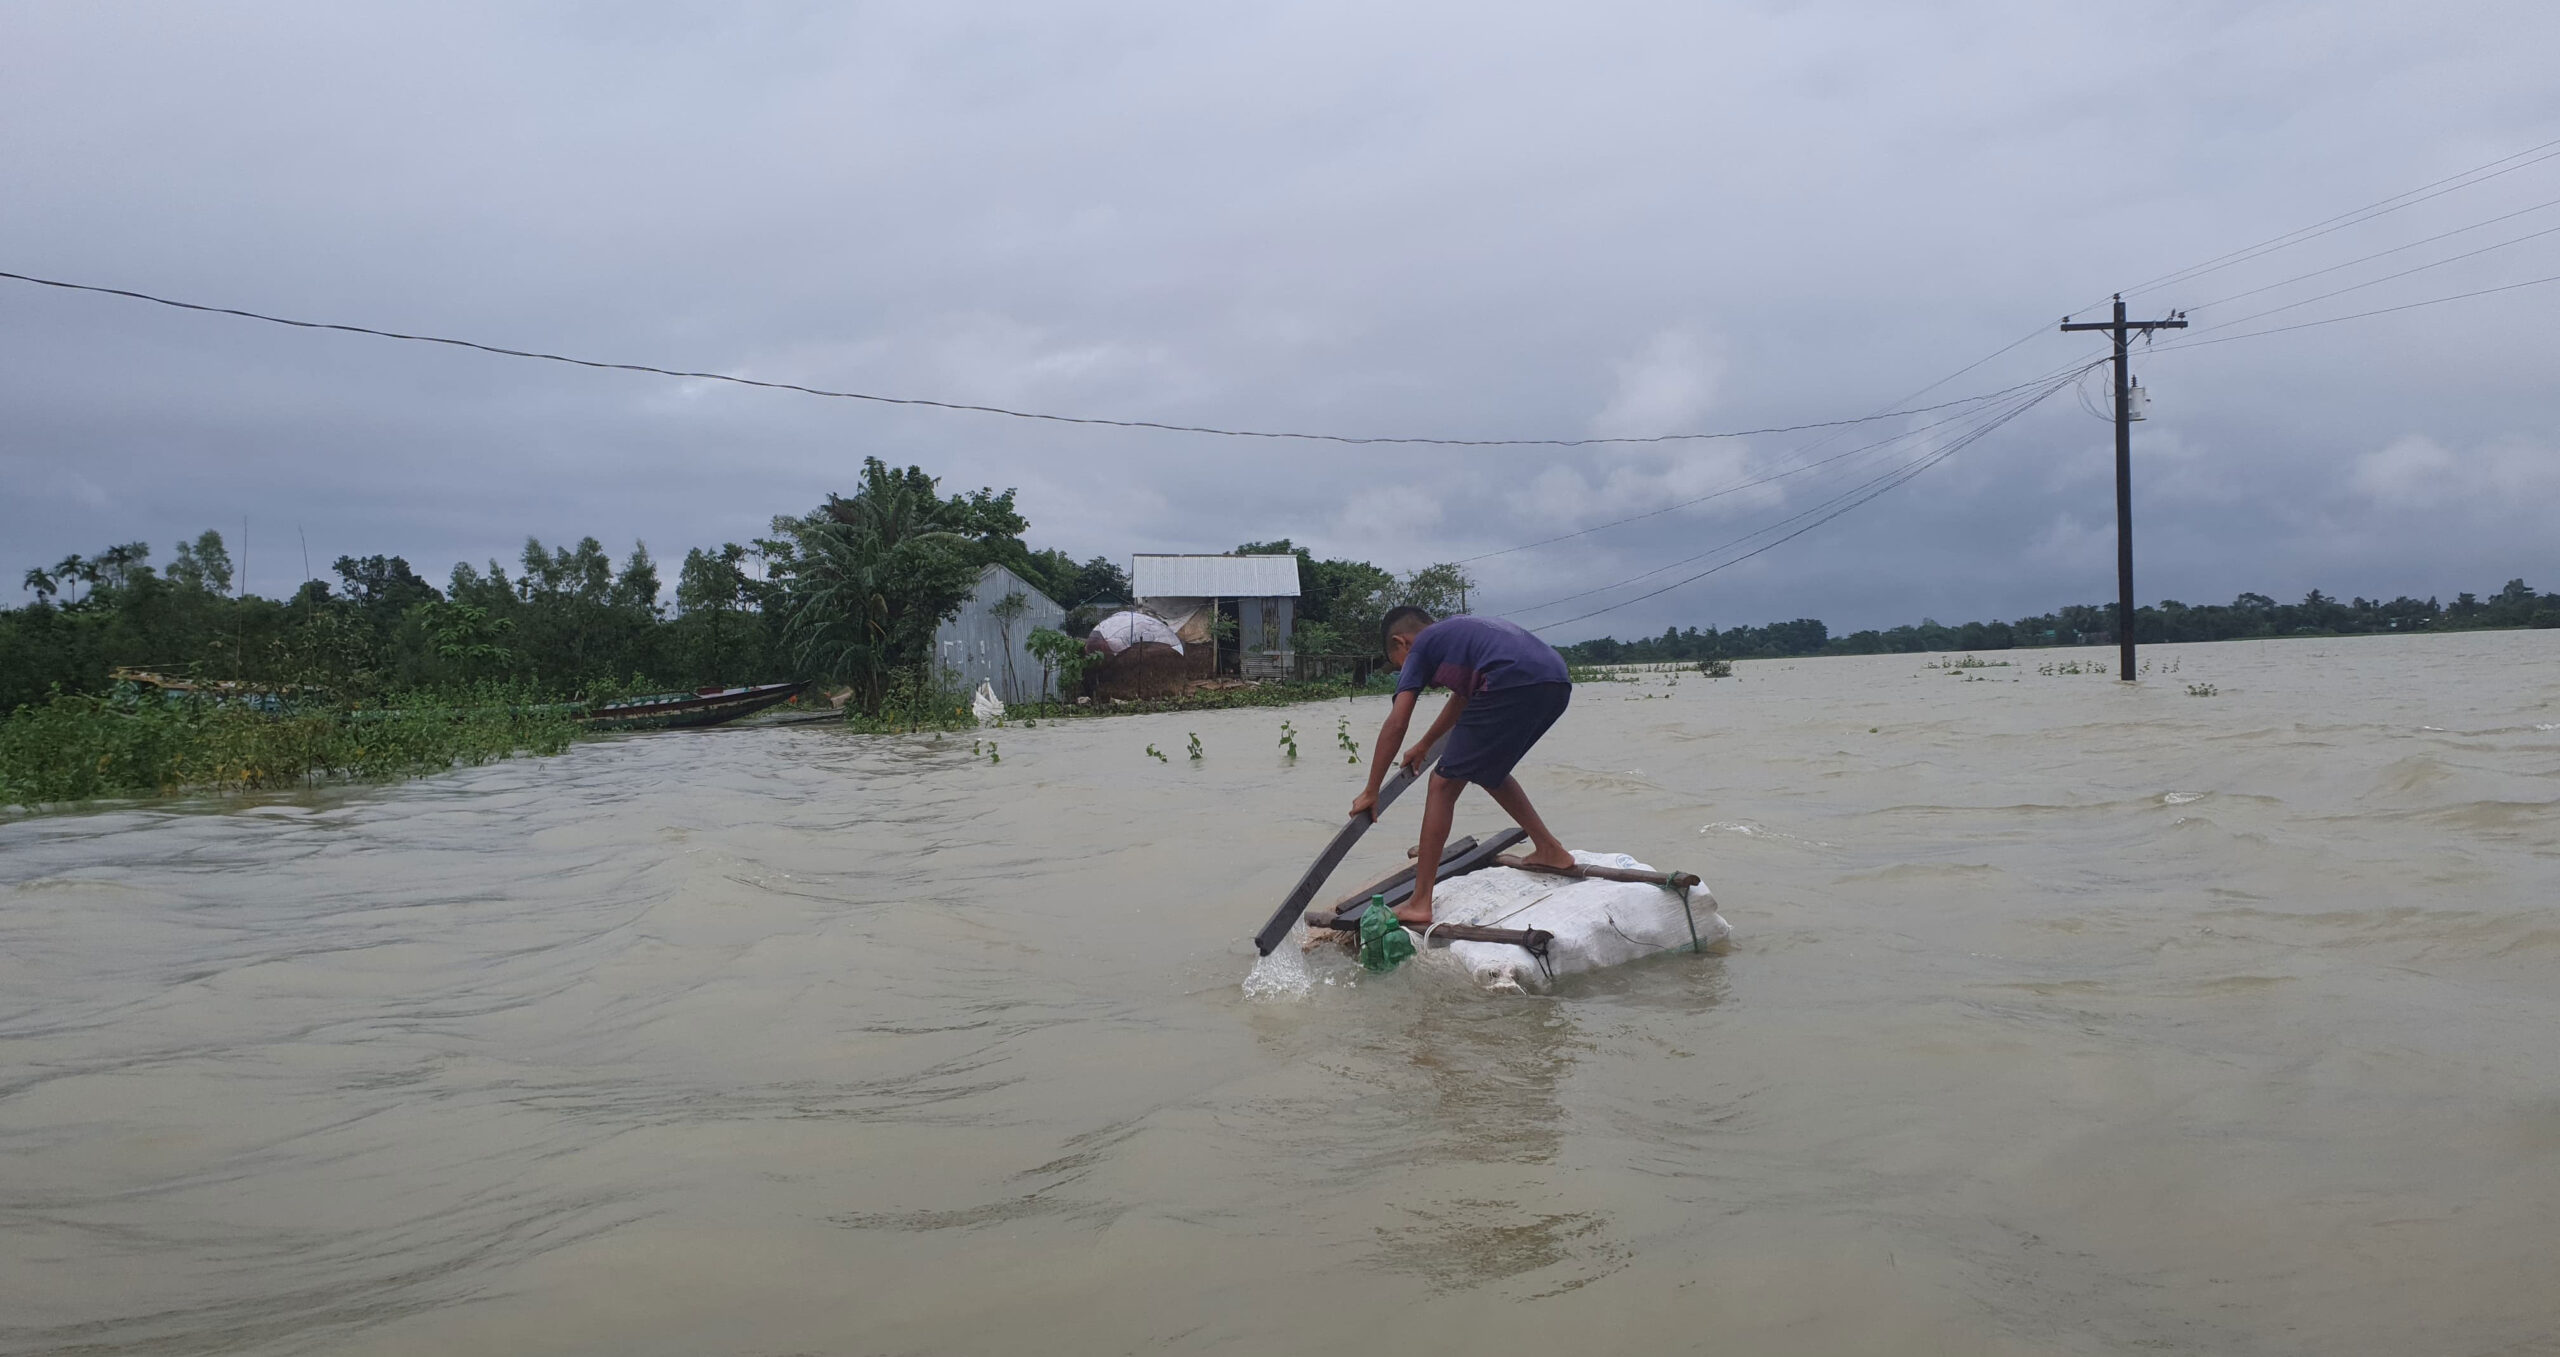 Under gray skies, a man leans forward on a makeshift raft to navigate flooding